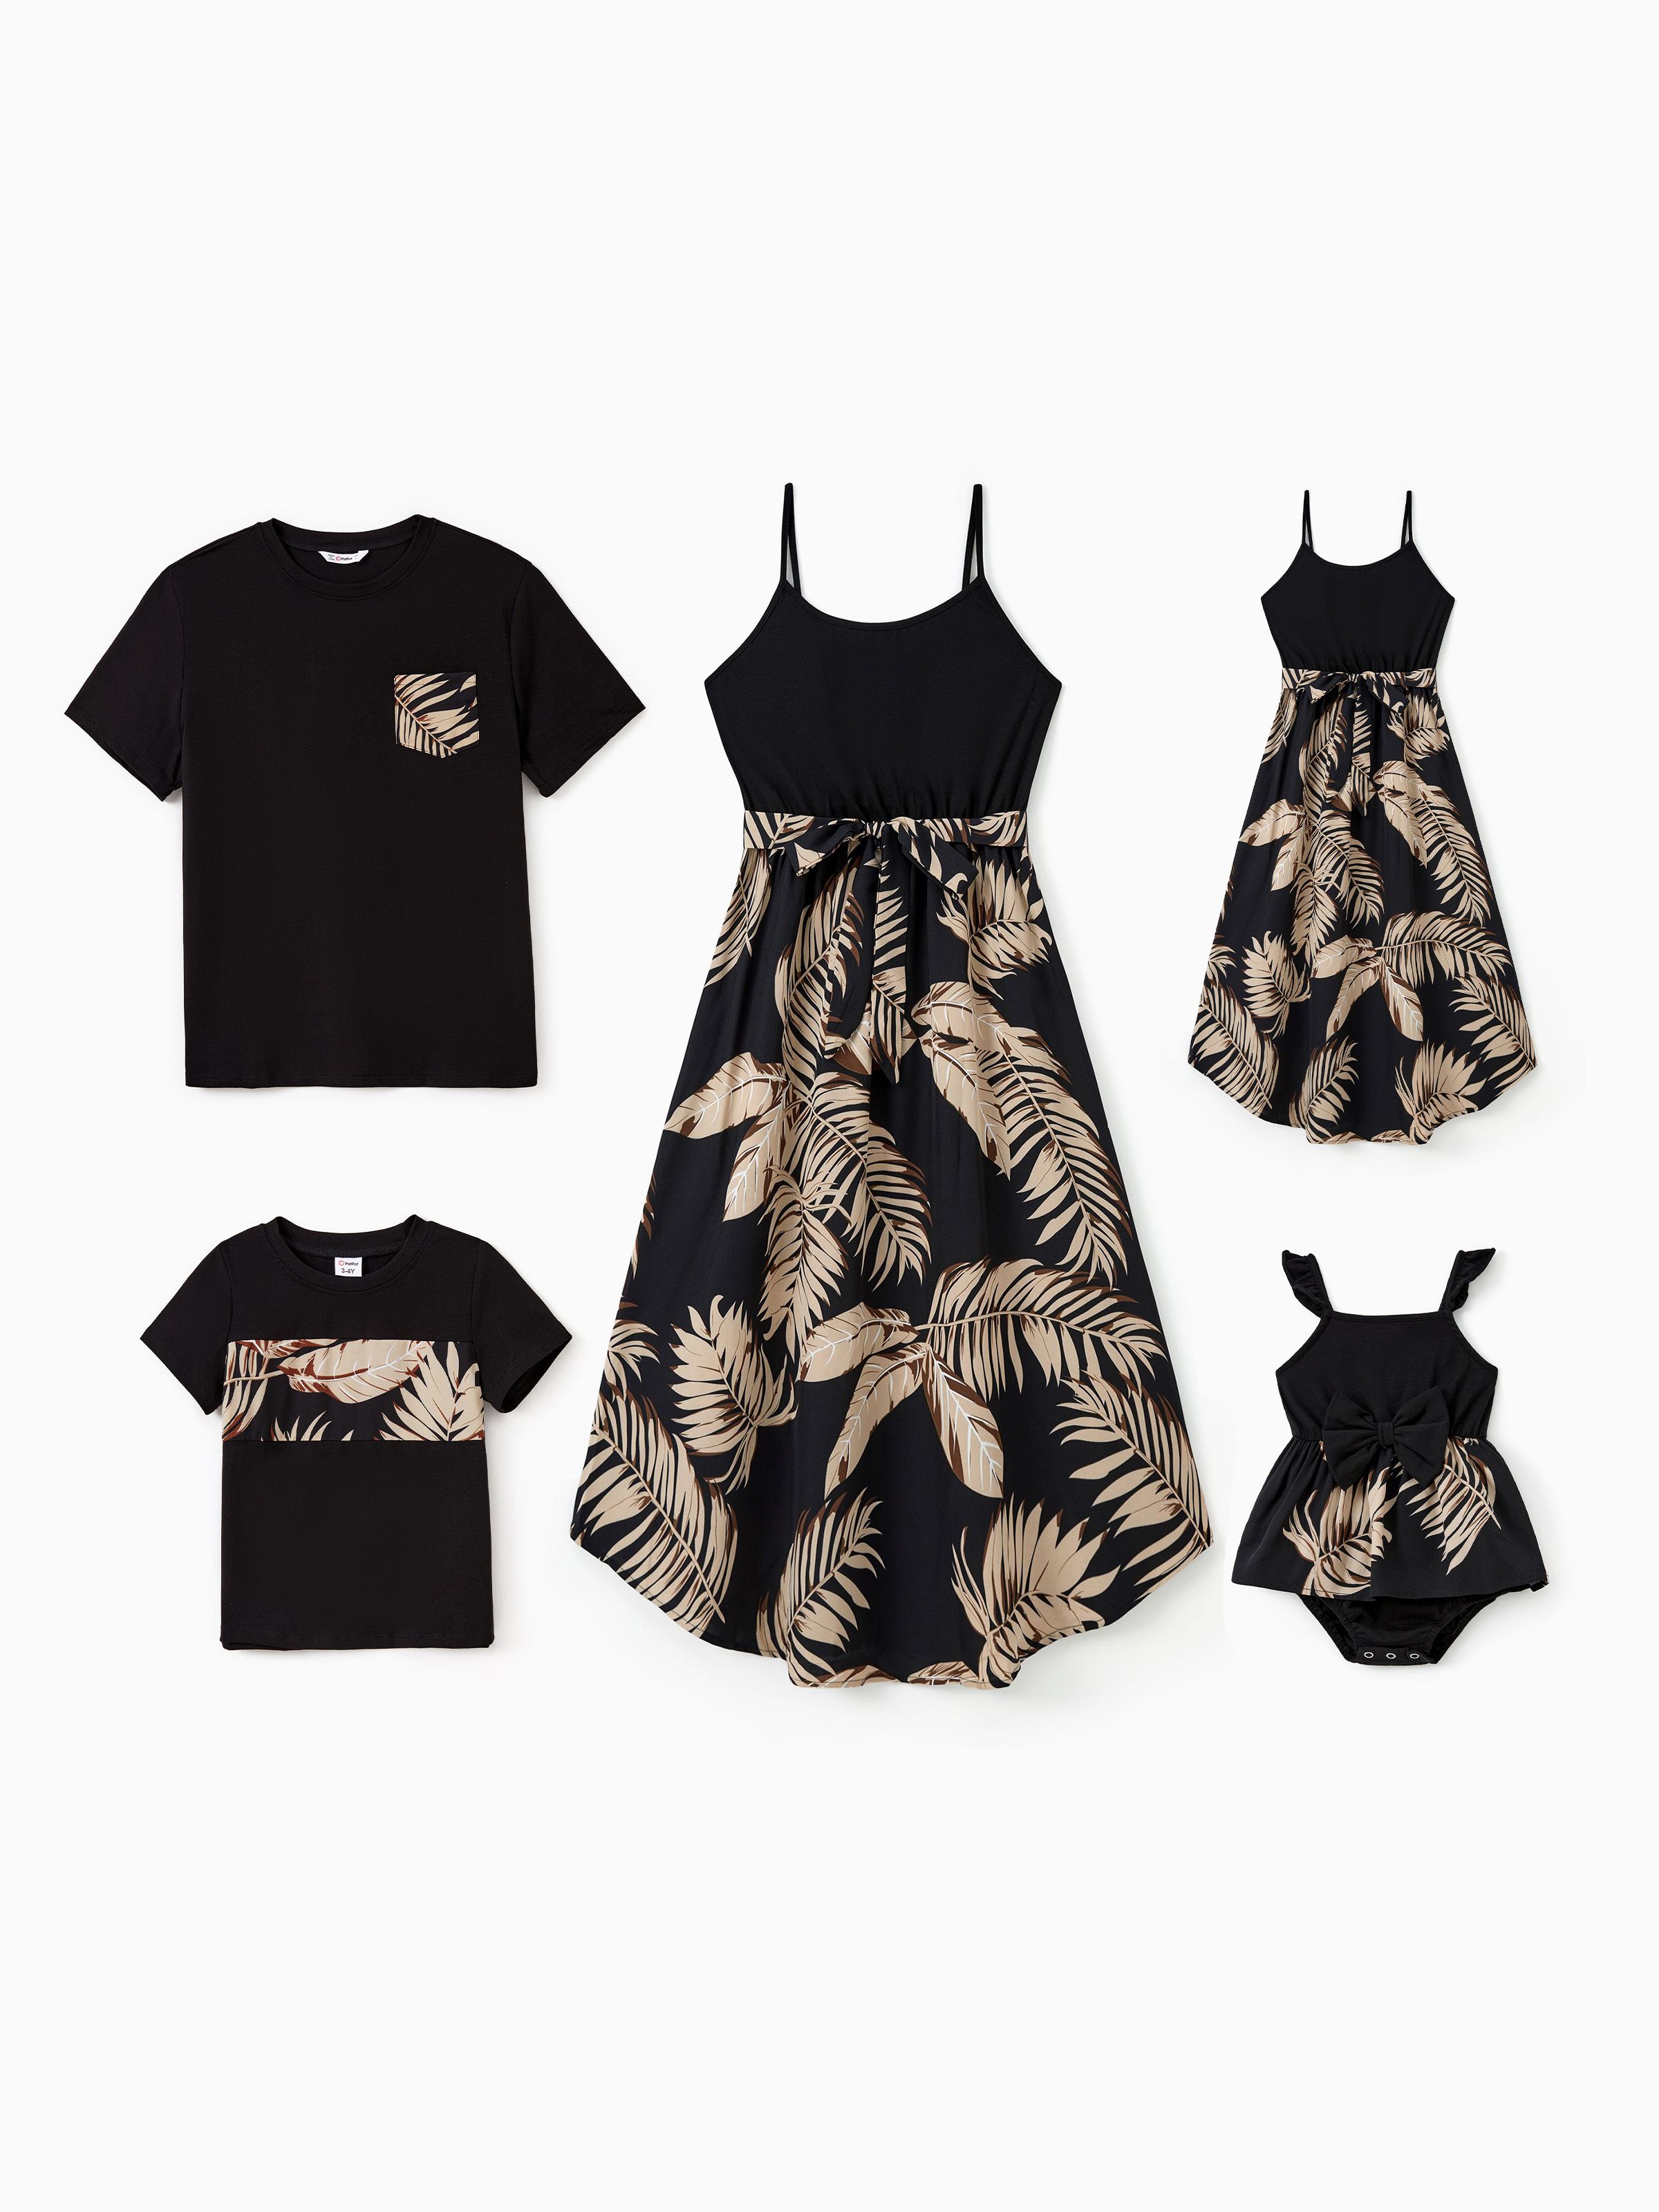 Family Matching Floral Print Black Dresses and Short-sleeve T-shirts Sets